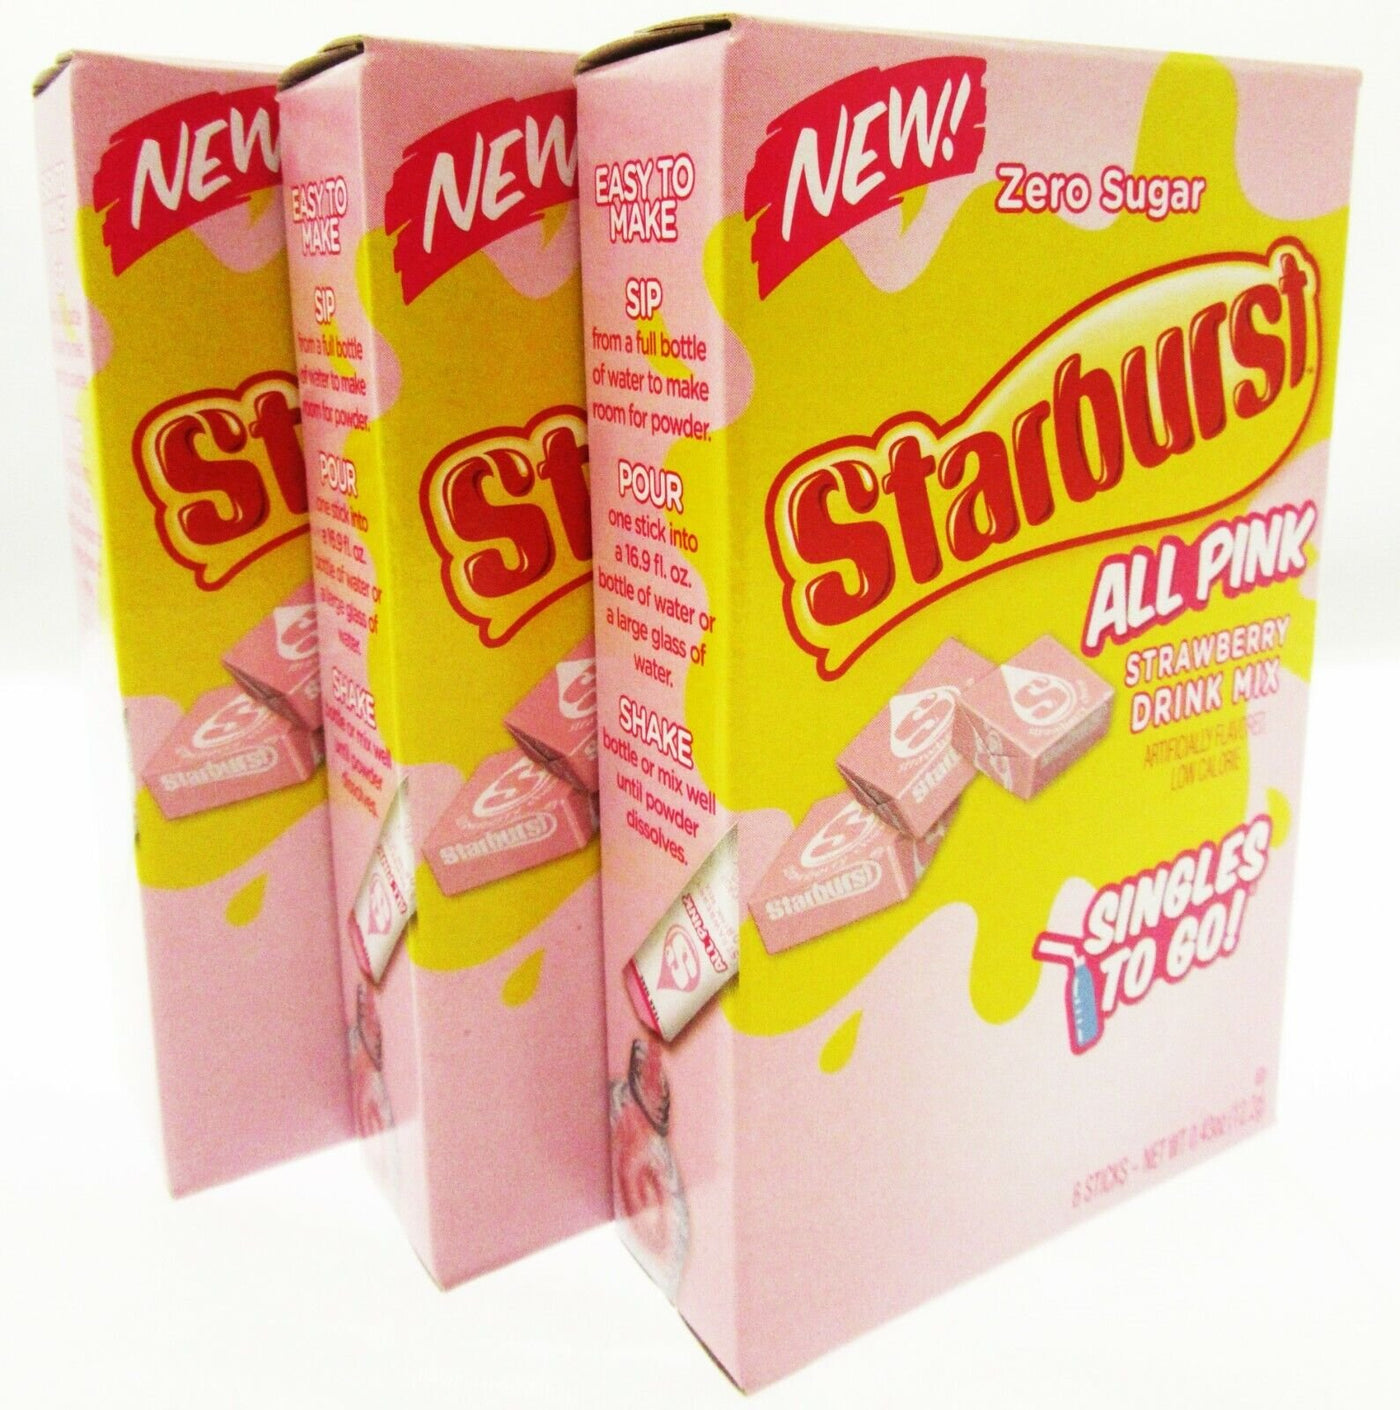 NEW! Starburst All Pink ~ Packets ~ Zero Sugar Free ~ Drink Mix ~ 3 Boxes